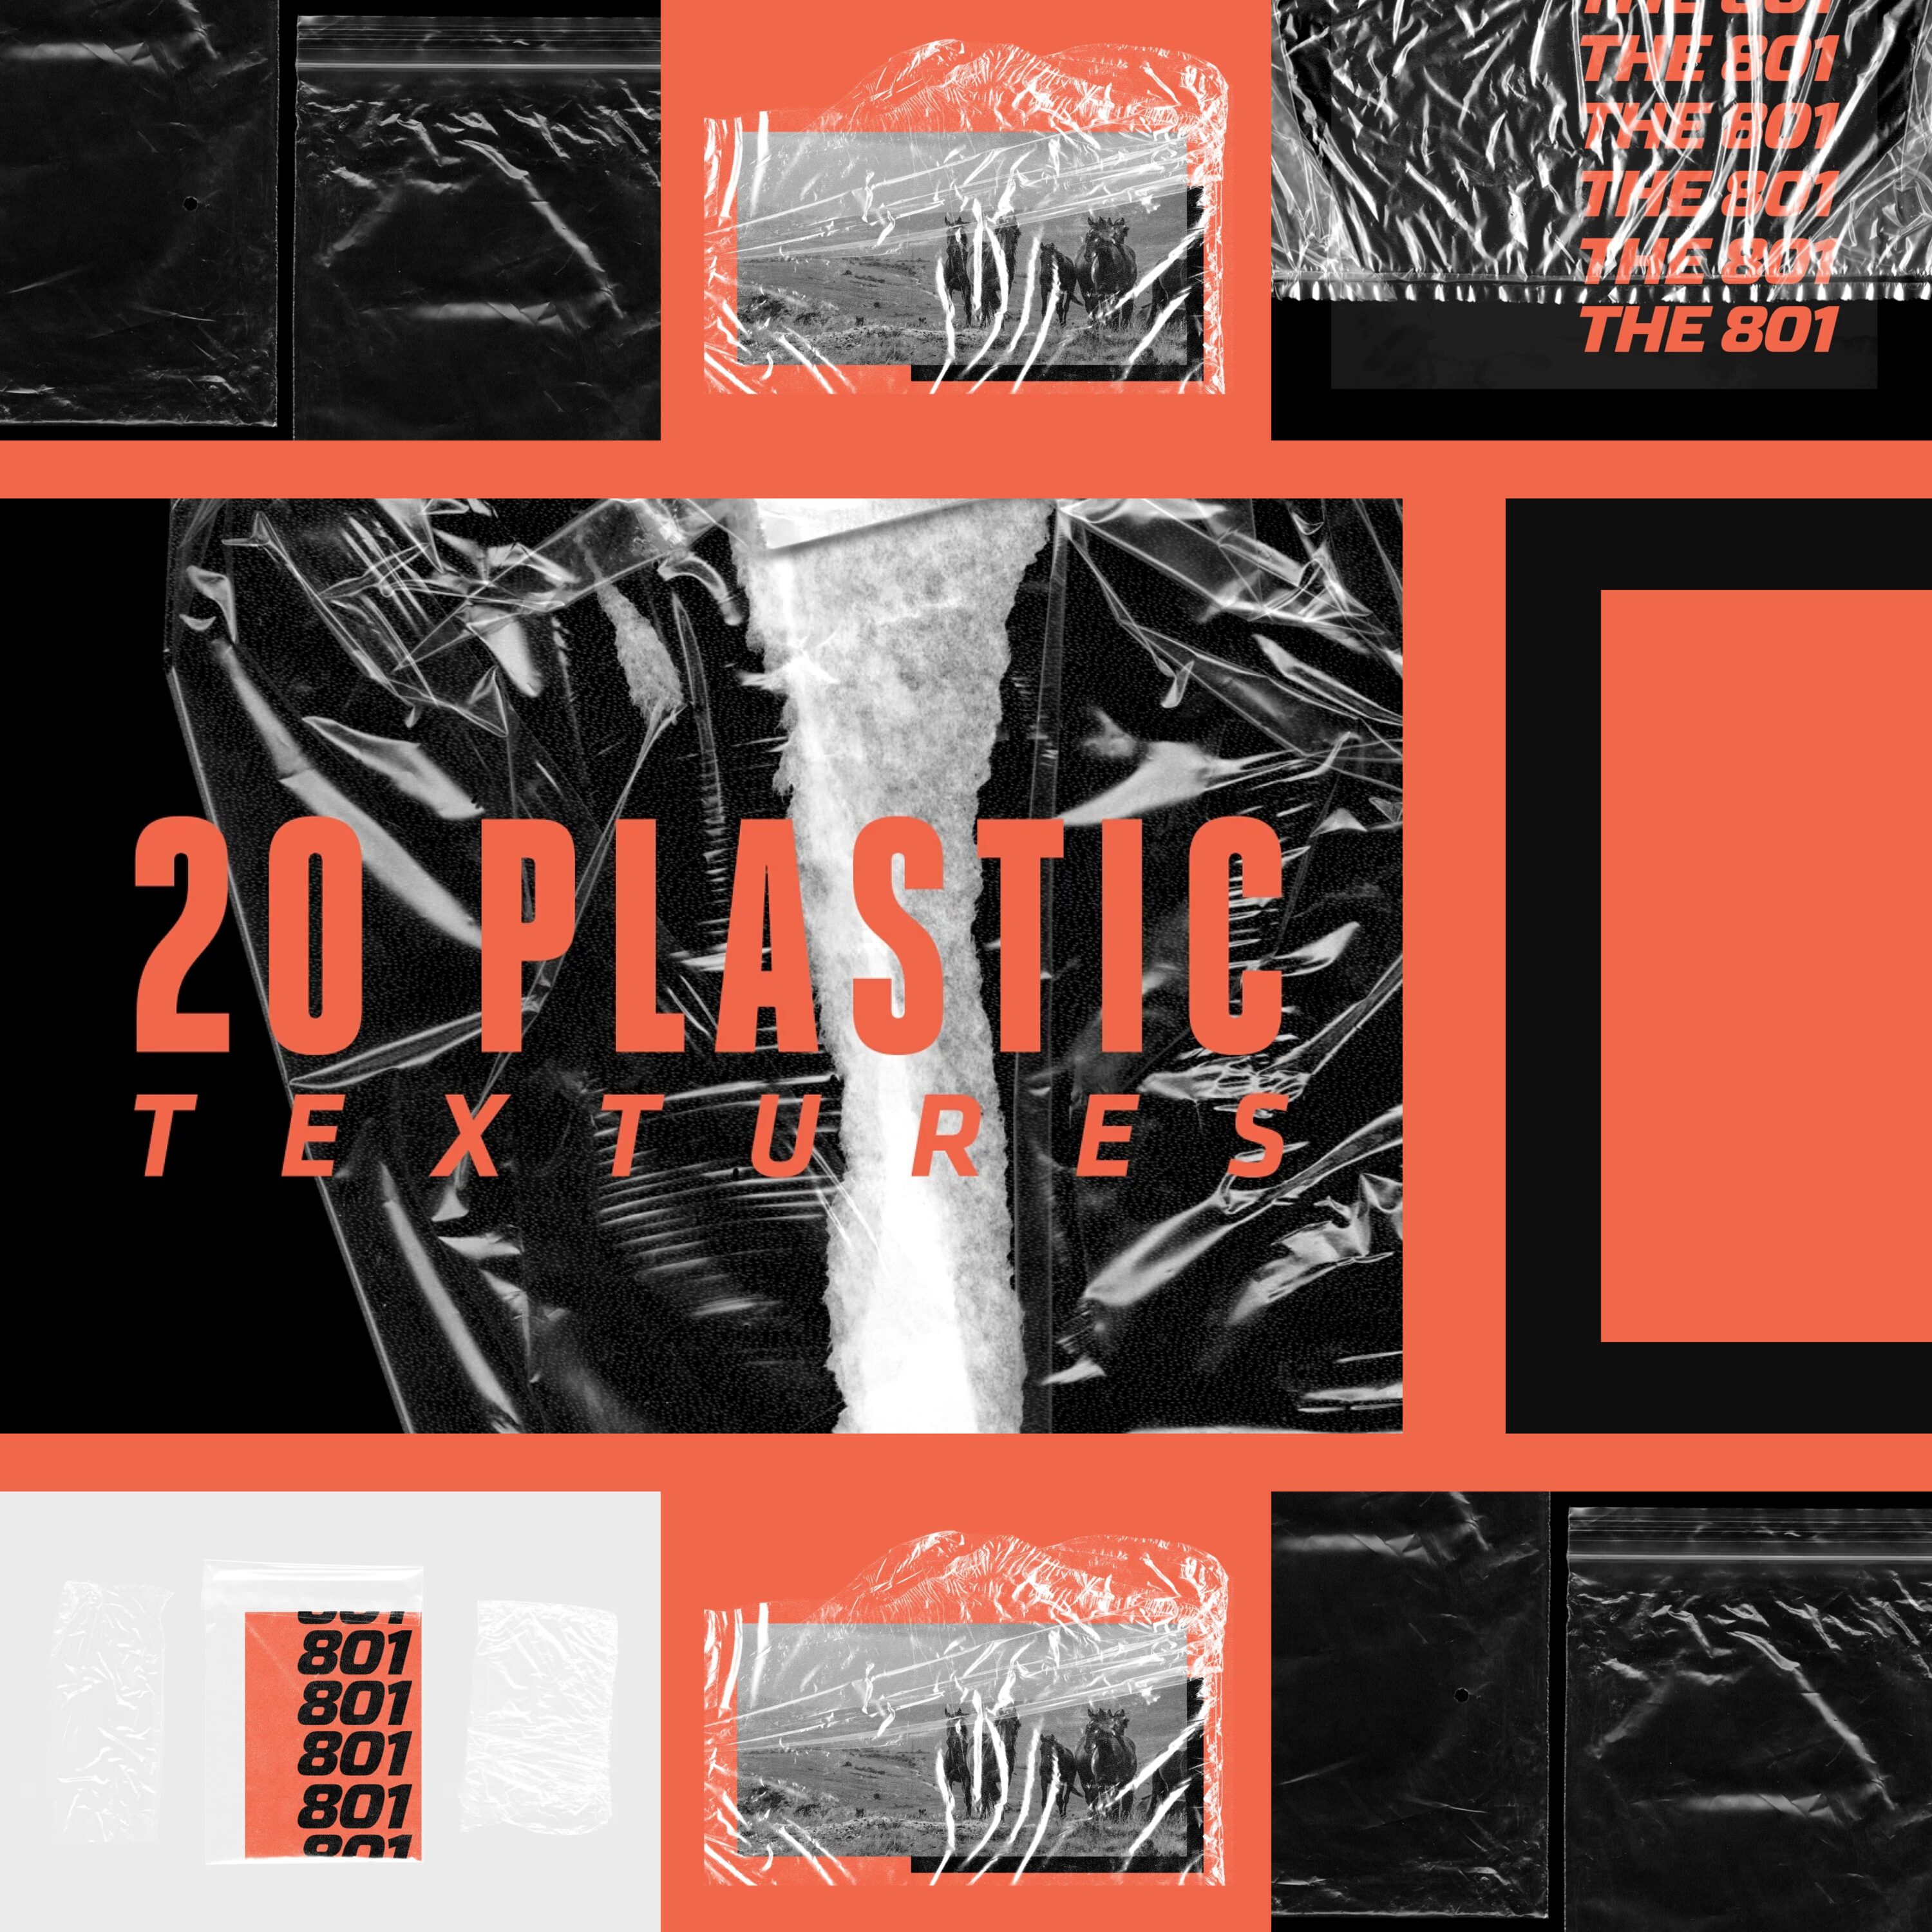 20 Plastic Textures cover image.